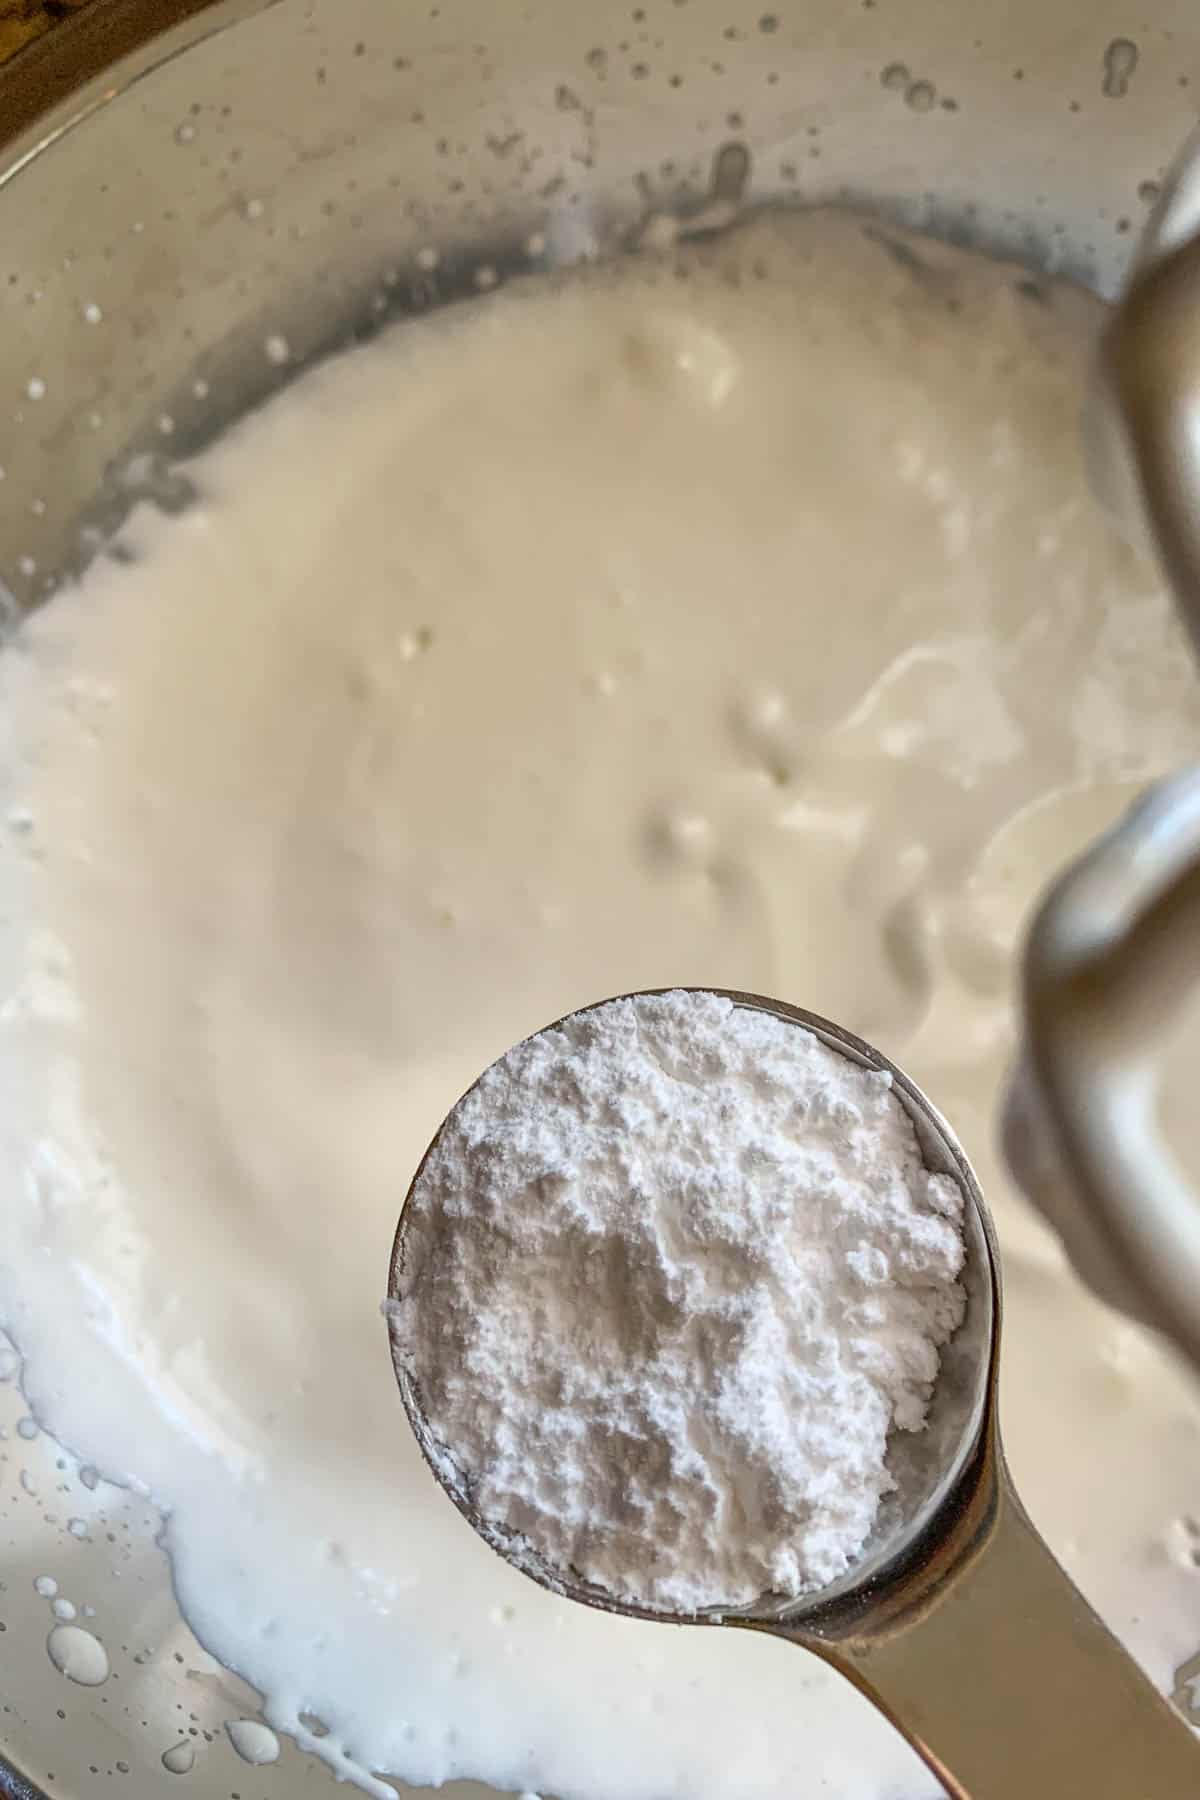 Powdered sugar being added to whipping cream.